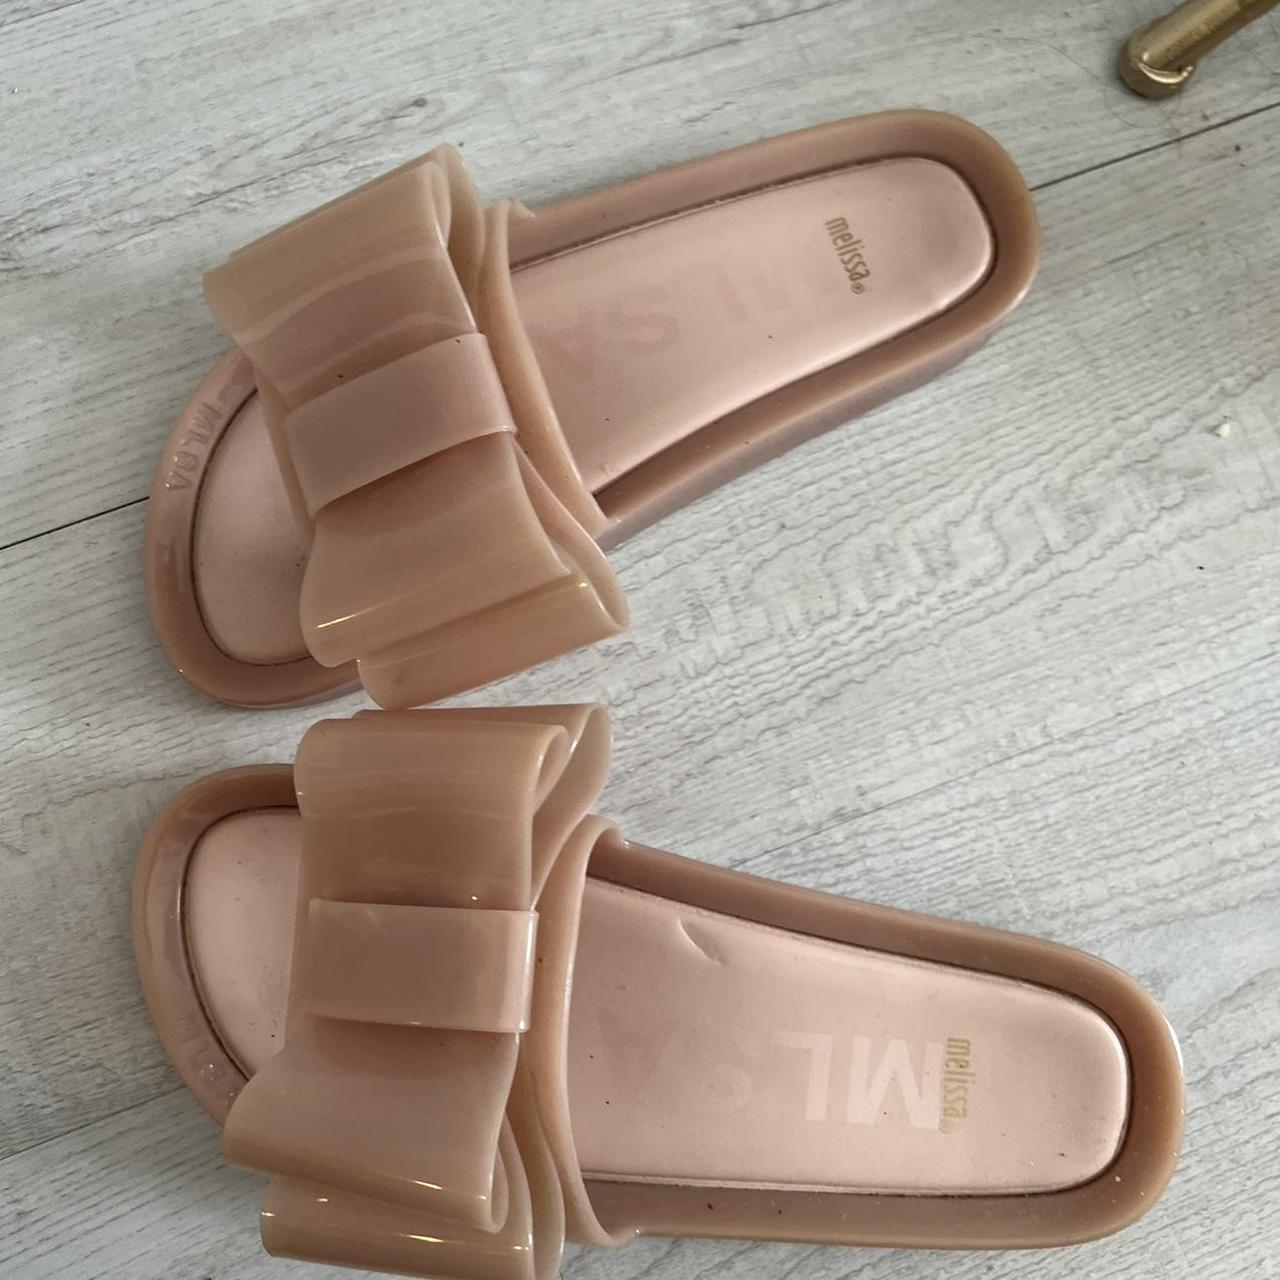 Product Image 1 - Melissa Bow Jelly Sandals

Light pink